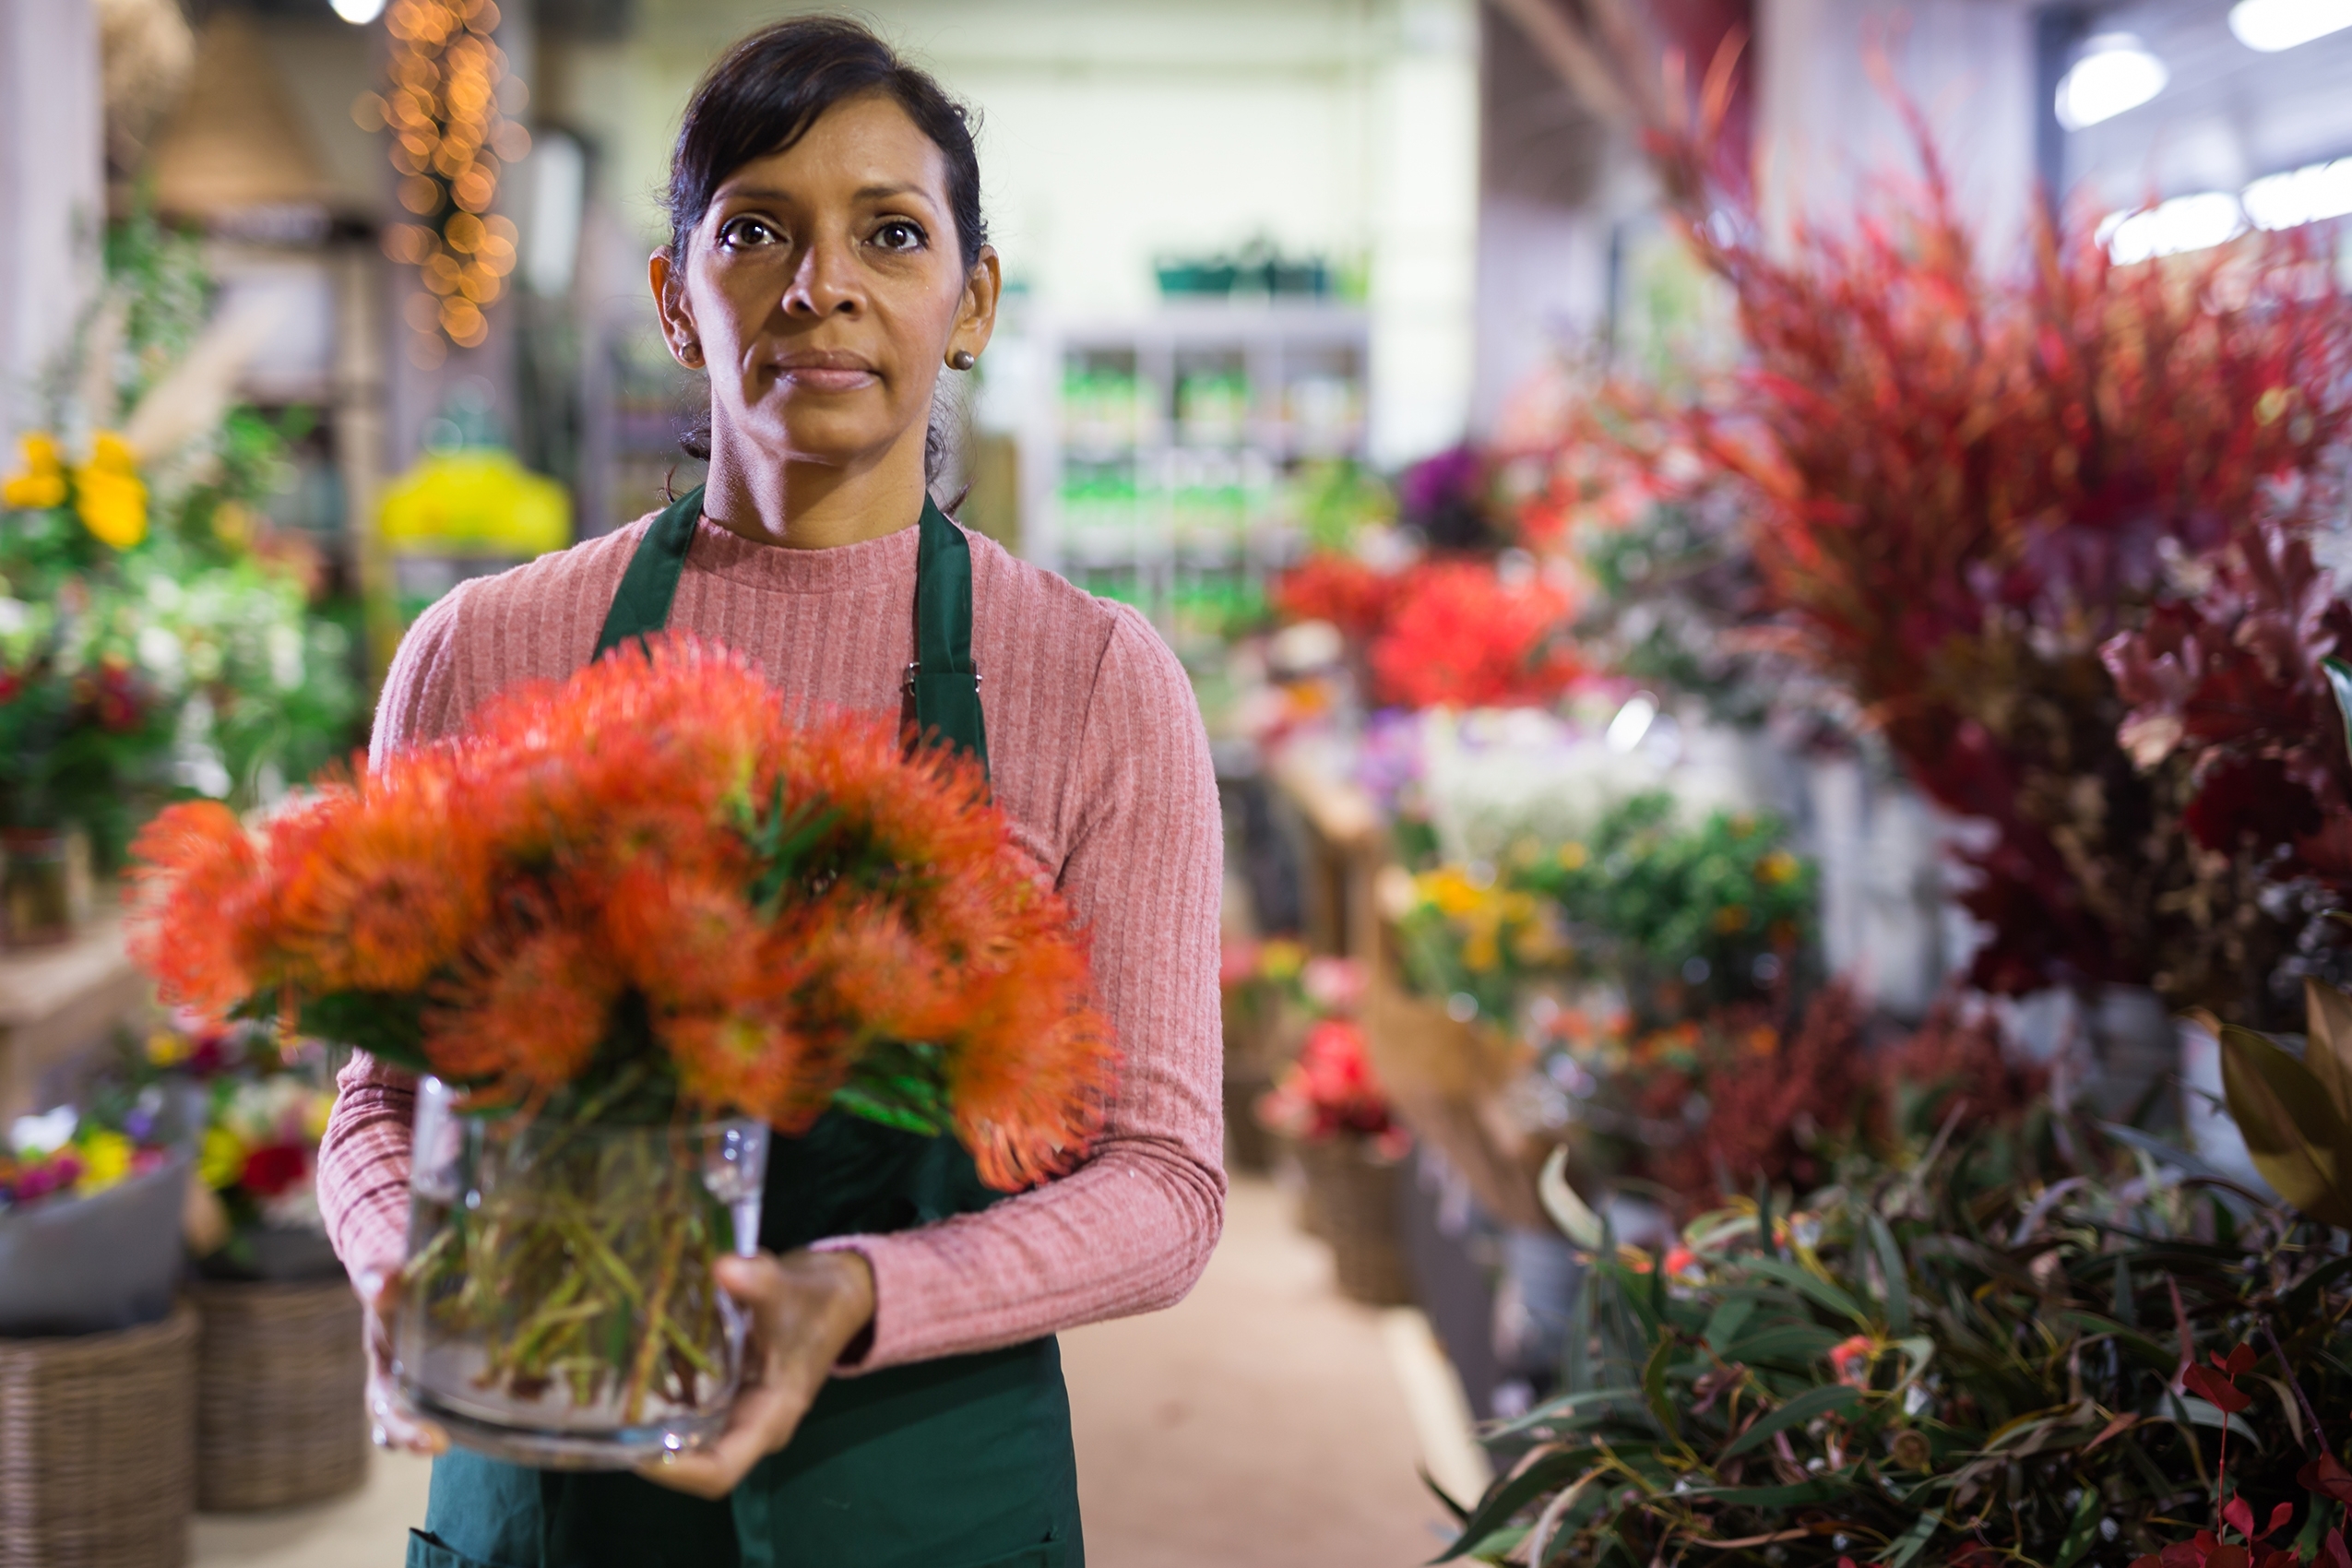 Hispanic,Woman,Florist,Carrying,Glass,Vase,With,Orange,Flowers,In